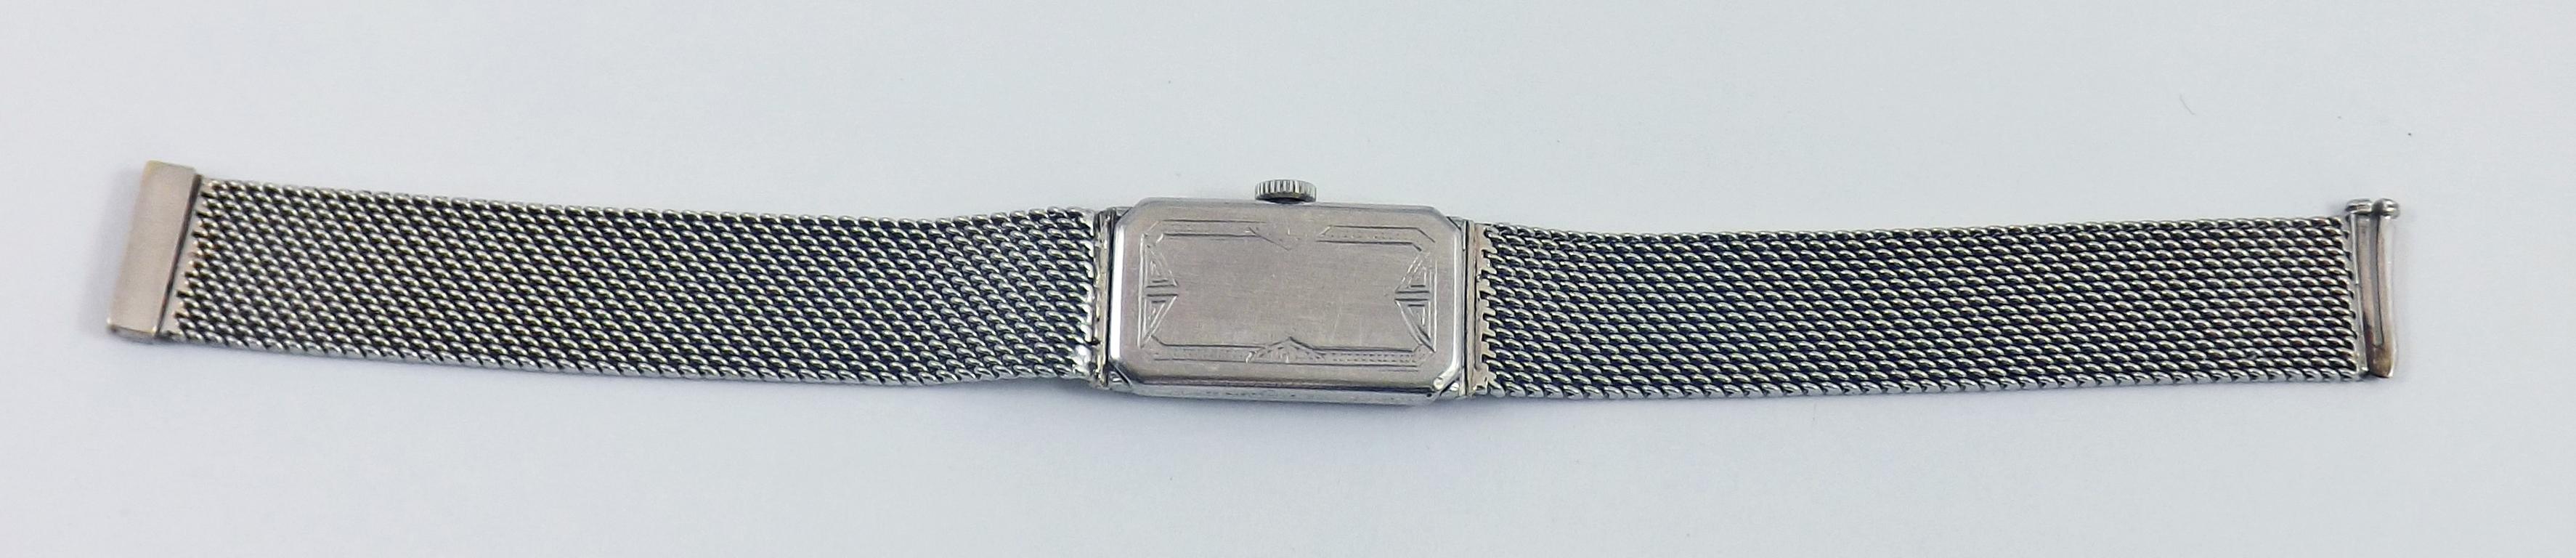 Audemars Piguet by J.E. Caldwell Ladies Platinum Diamond Manual Wristwatch In Excellent Condition For Sale In New York, NY